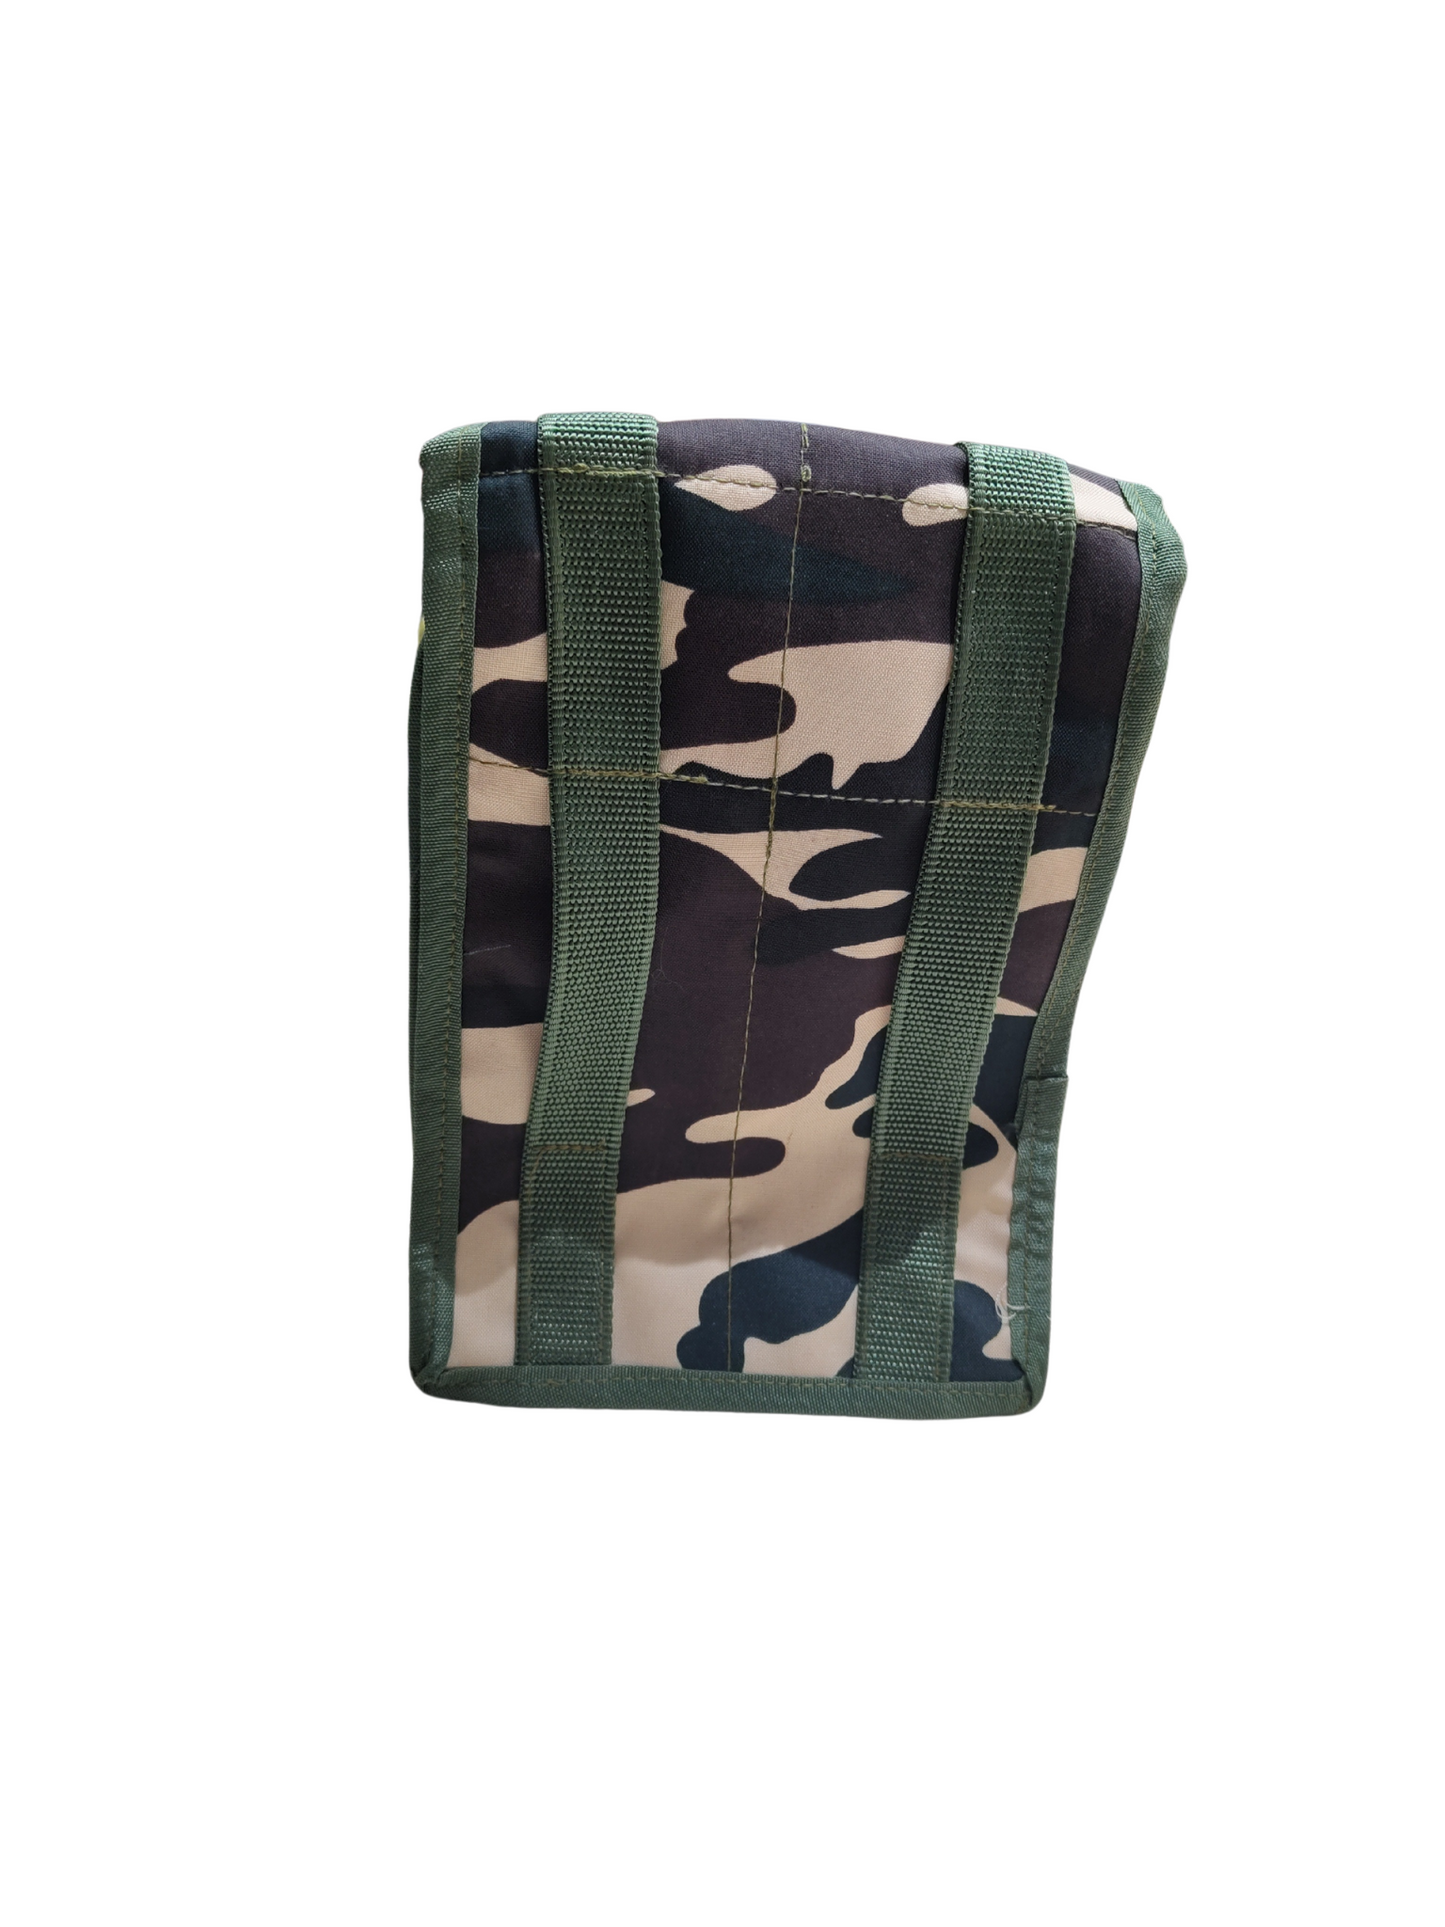 Camouflage Olive Green Utility Pouch